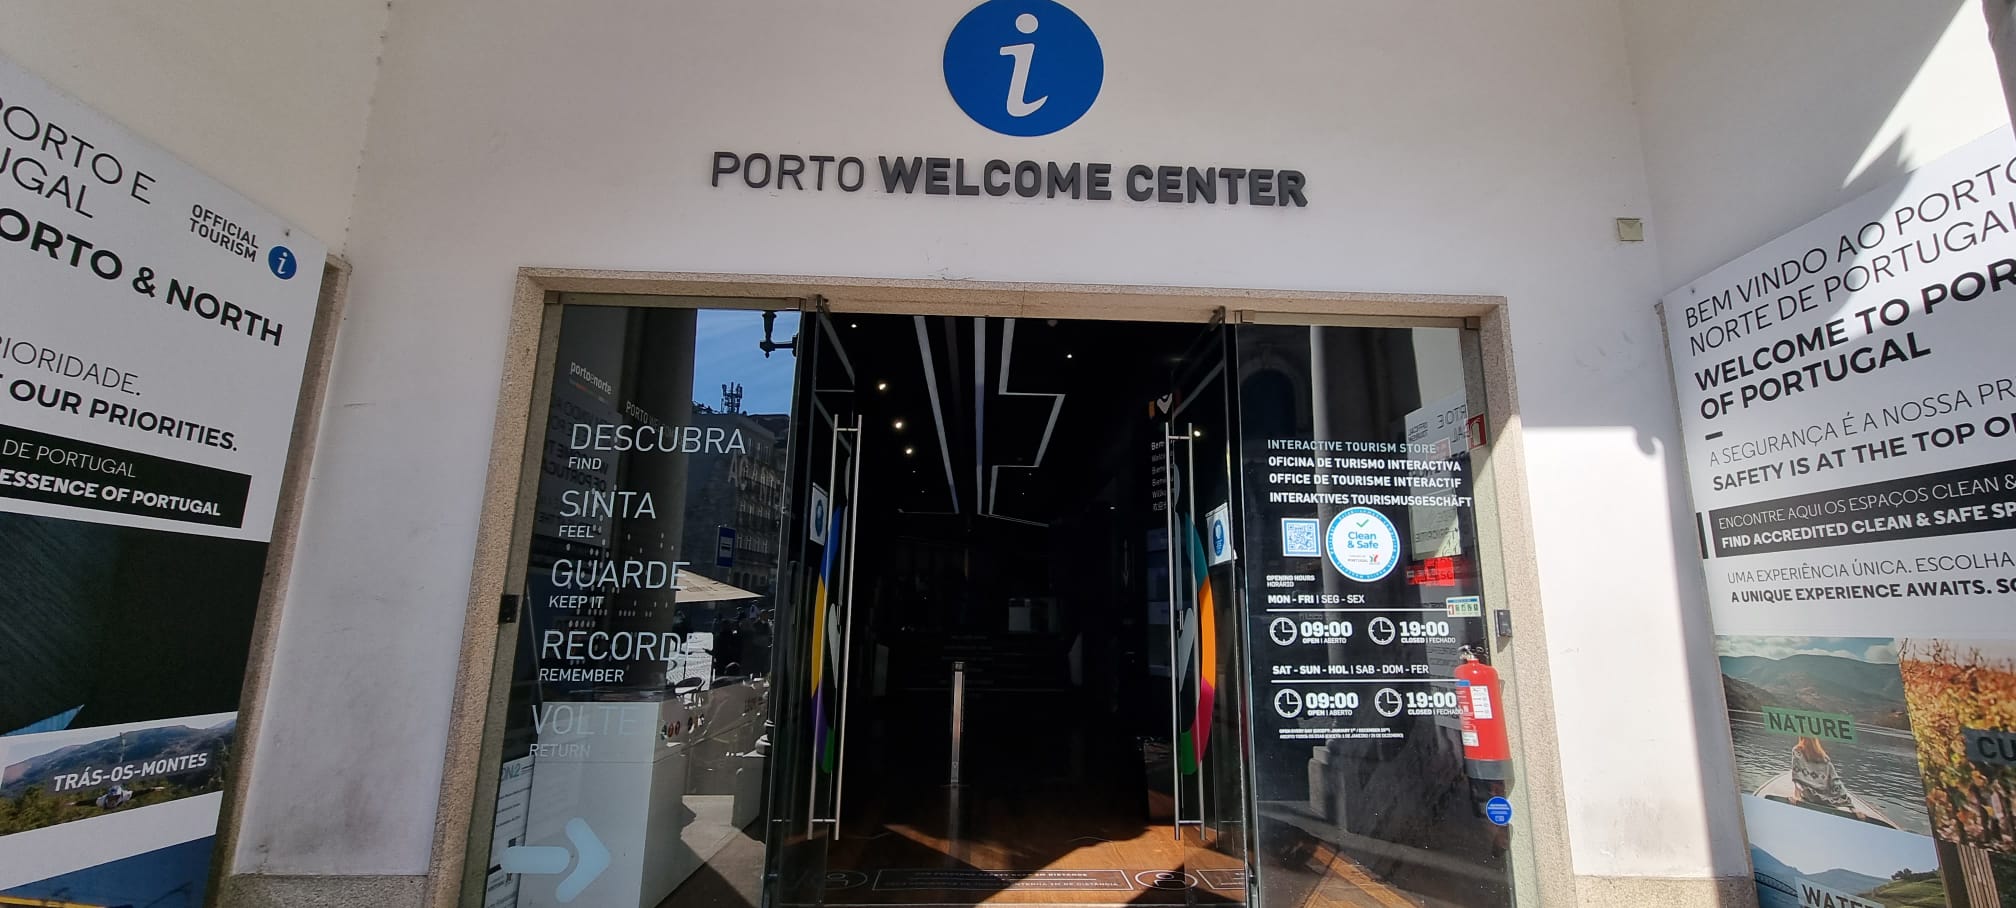 Porto Welcome Center - Tourism offices